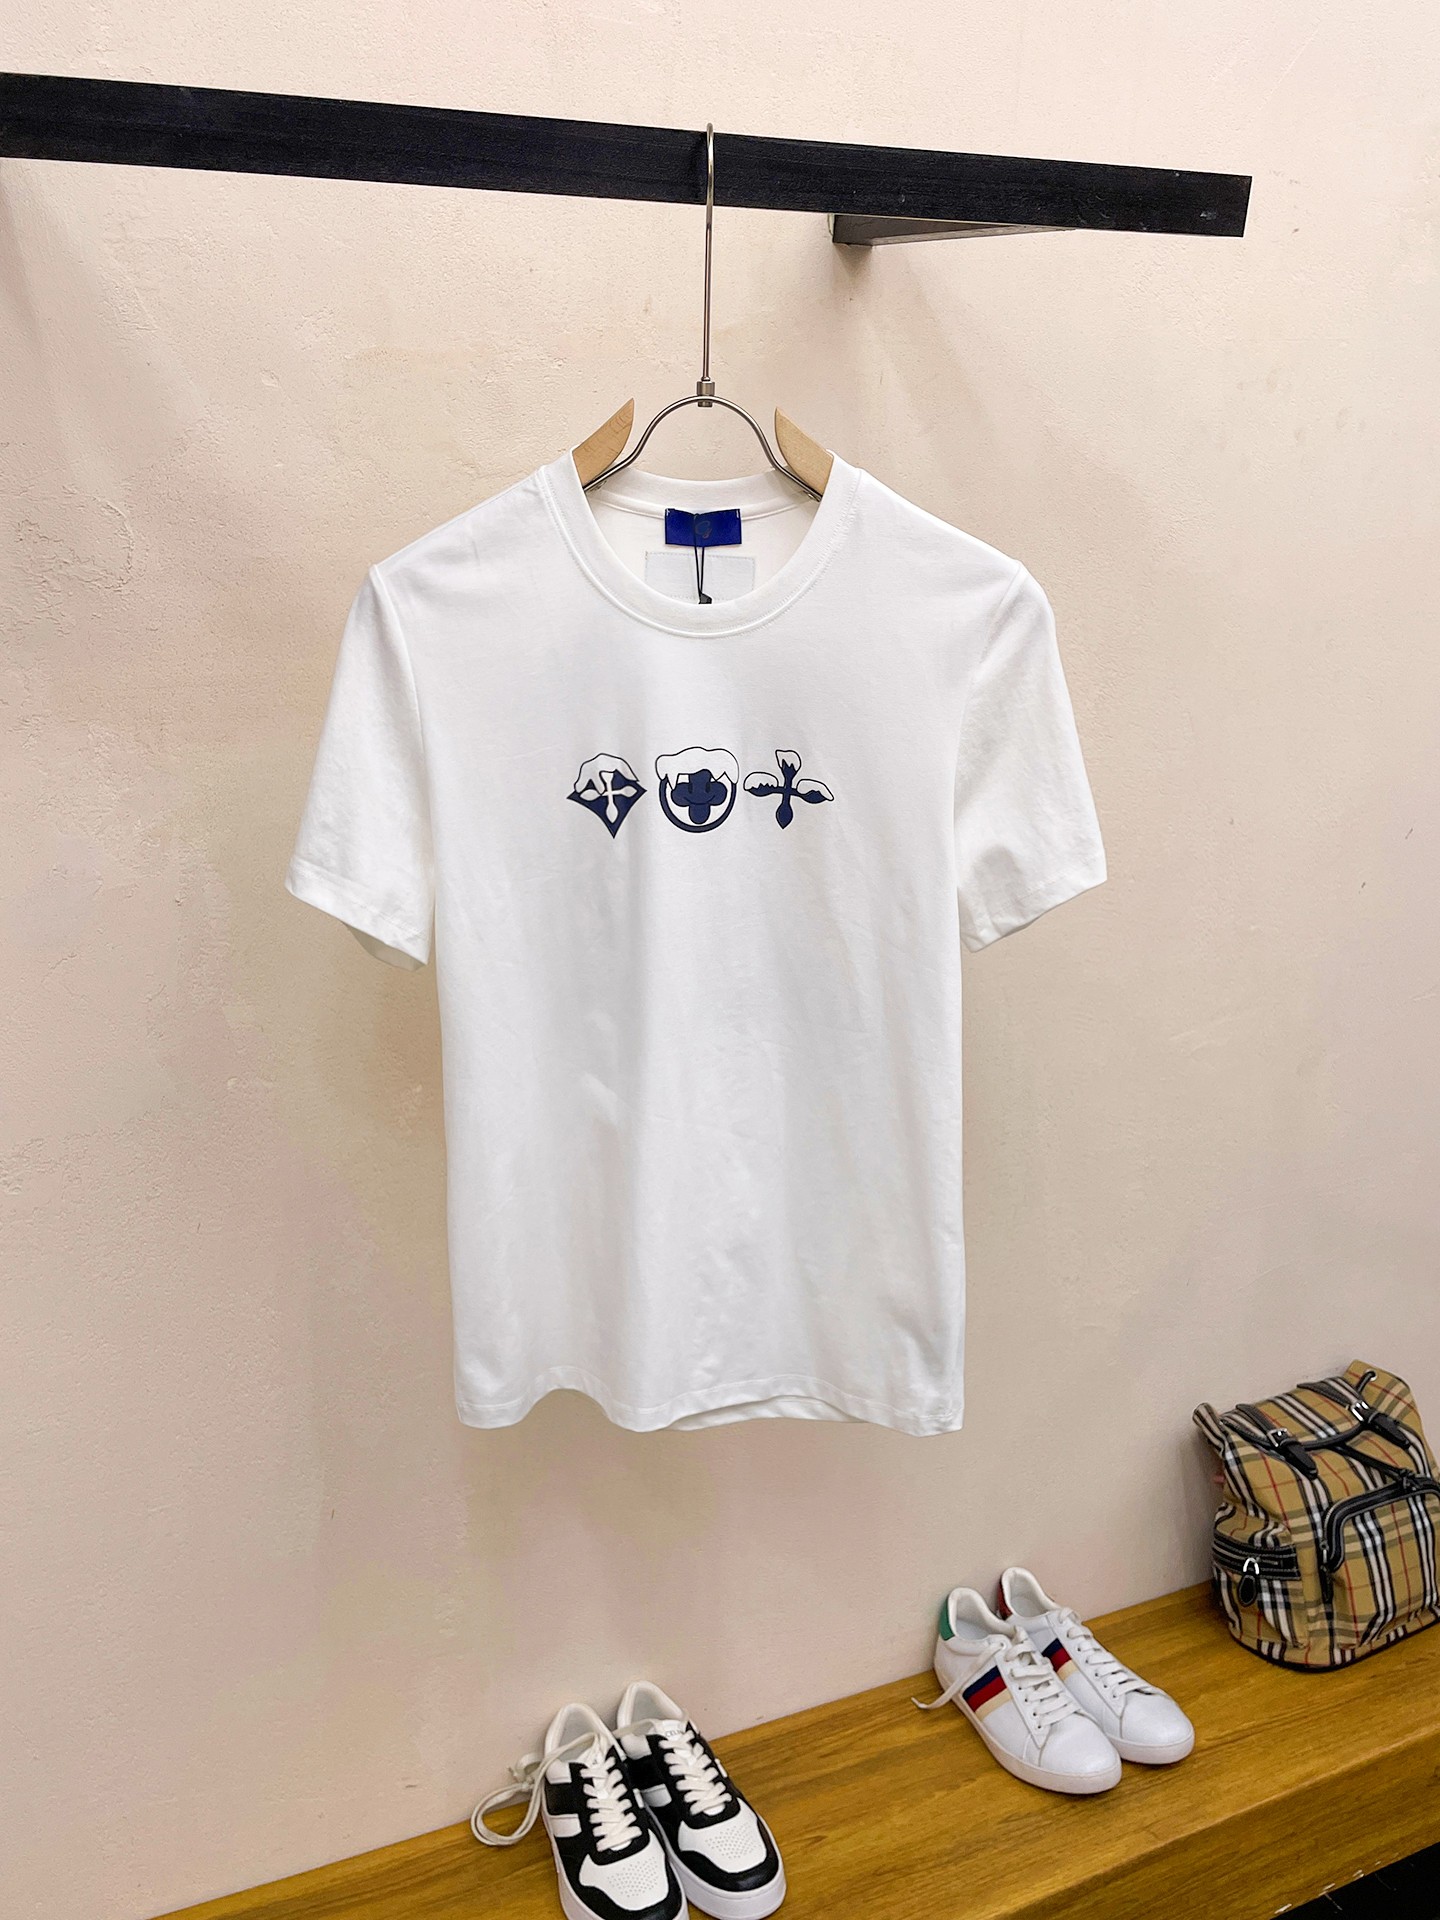 Louis Vuitton Replicas
 Clothing T-Shirt Buy High-Quality Fake
 Men Cotton Mercerized Spring/Summer Collection Fashion Short Sleeve